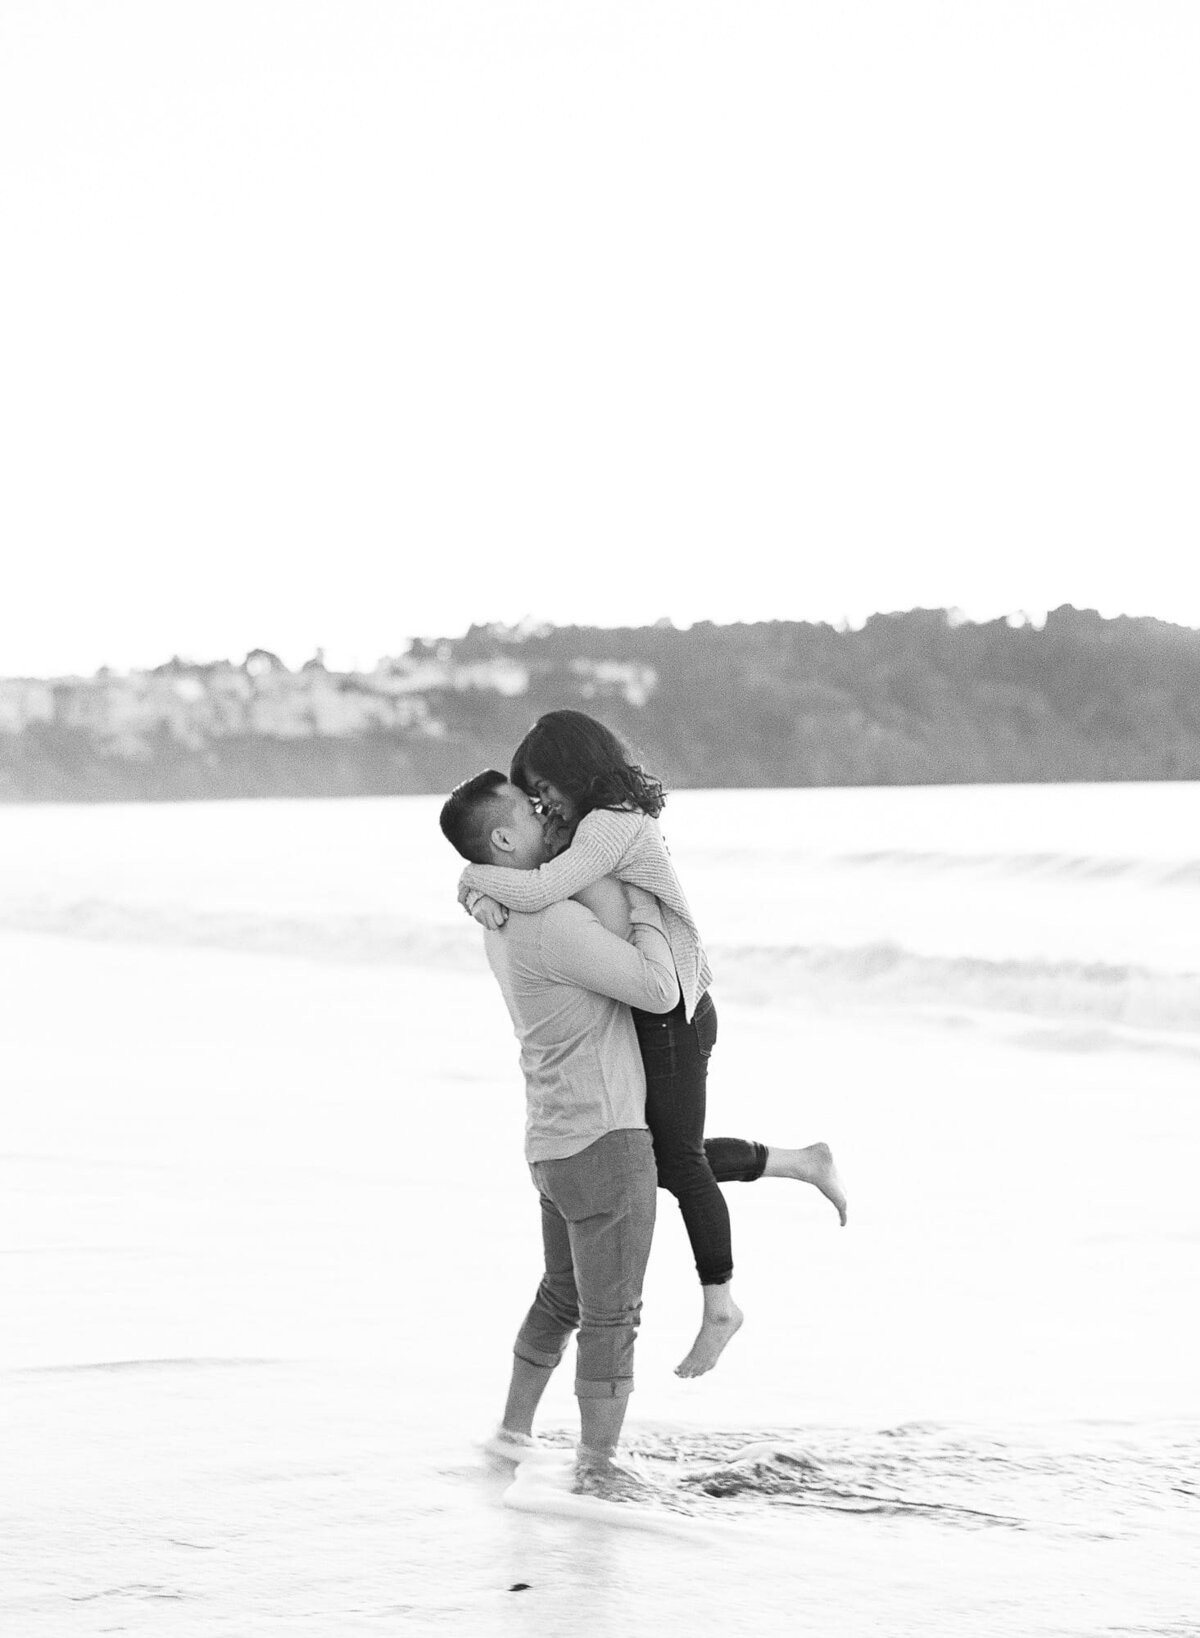 Strong man lifts his partner on nearshore waters at a beach.